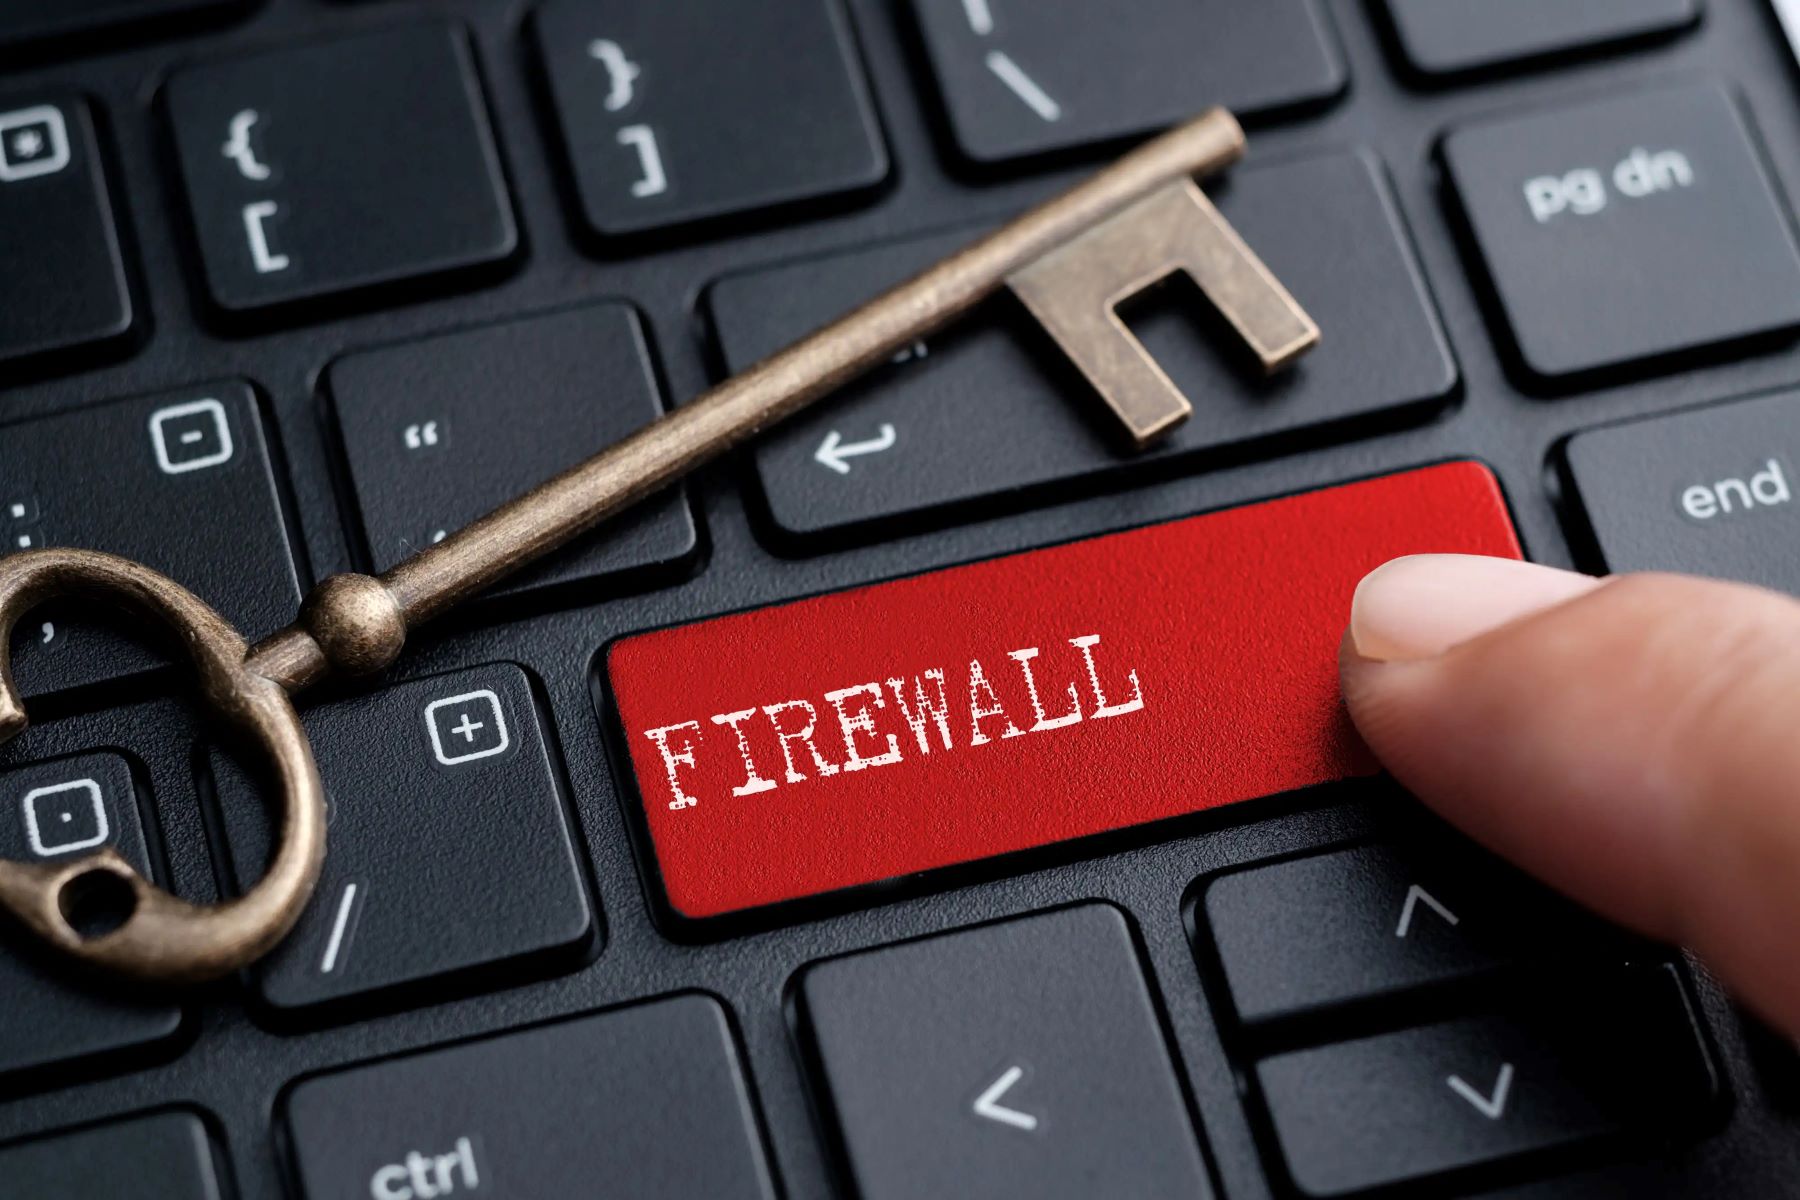 How To Use A Firewall